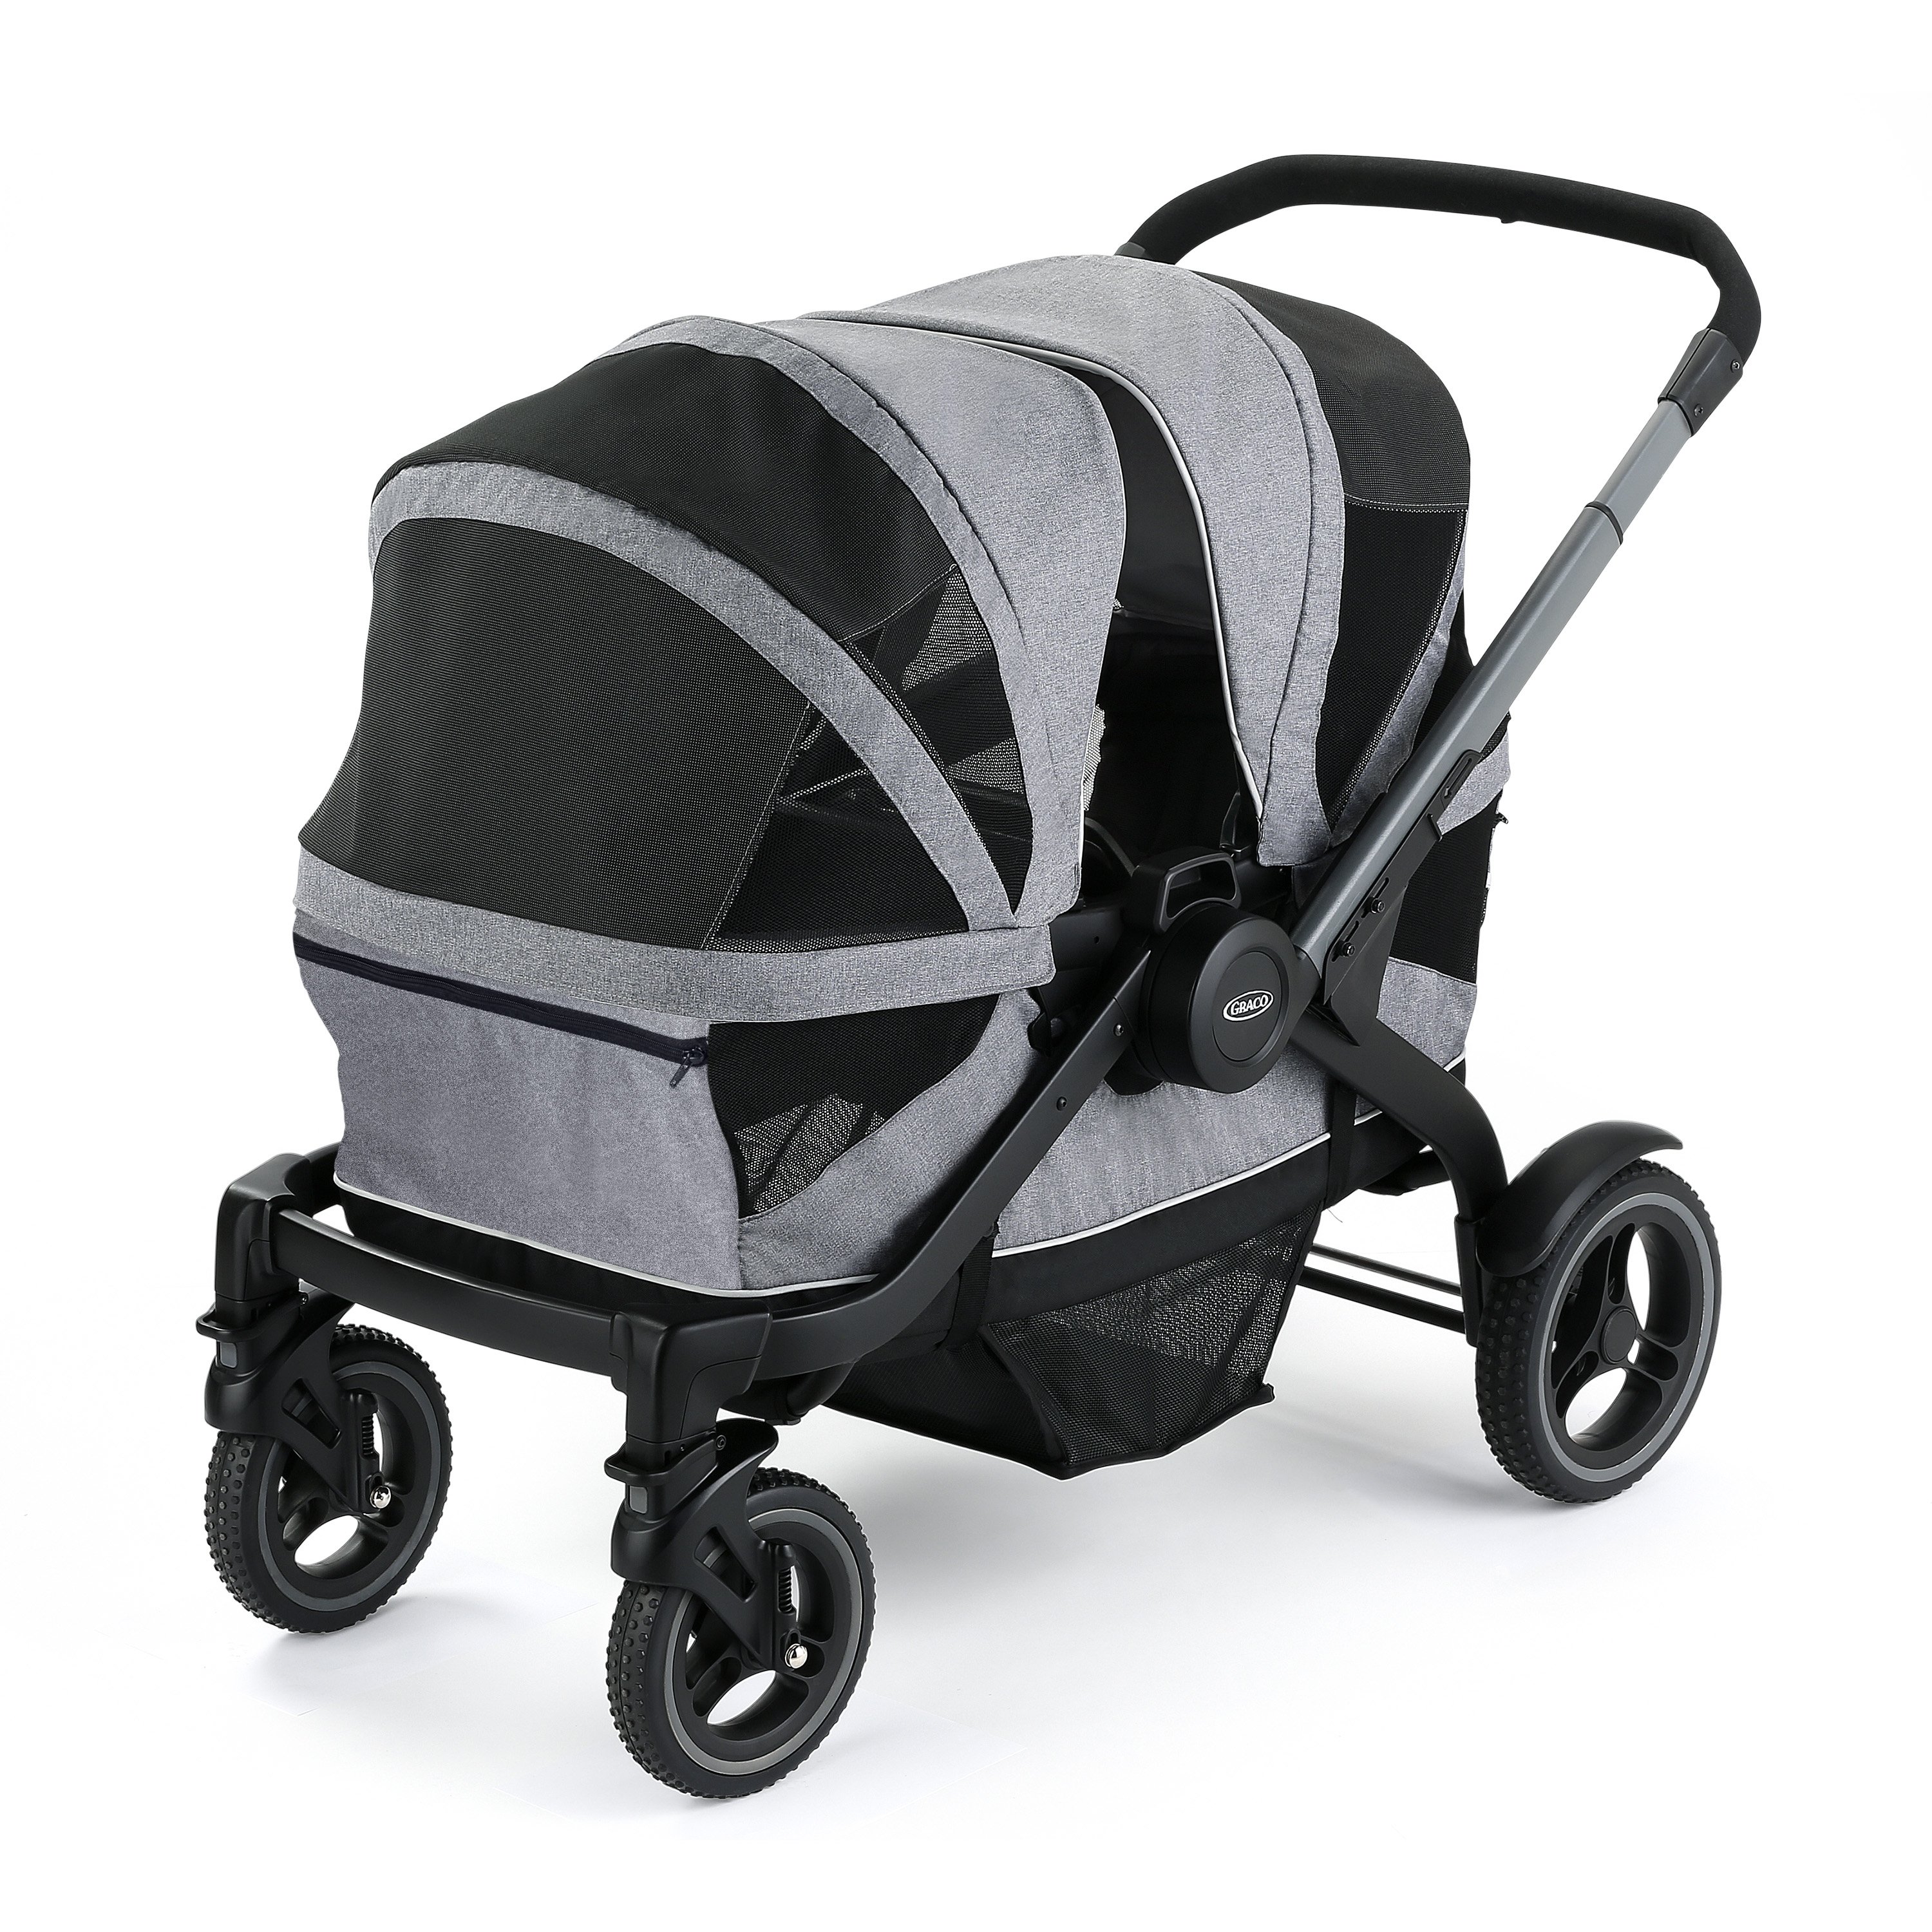 Baby Carriage UltraLight stroller Can Sit Down 0-5 years Child Cart Shock Proof 